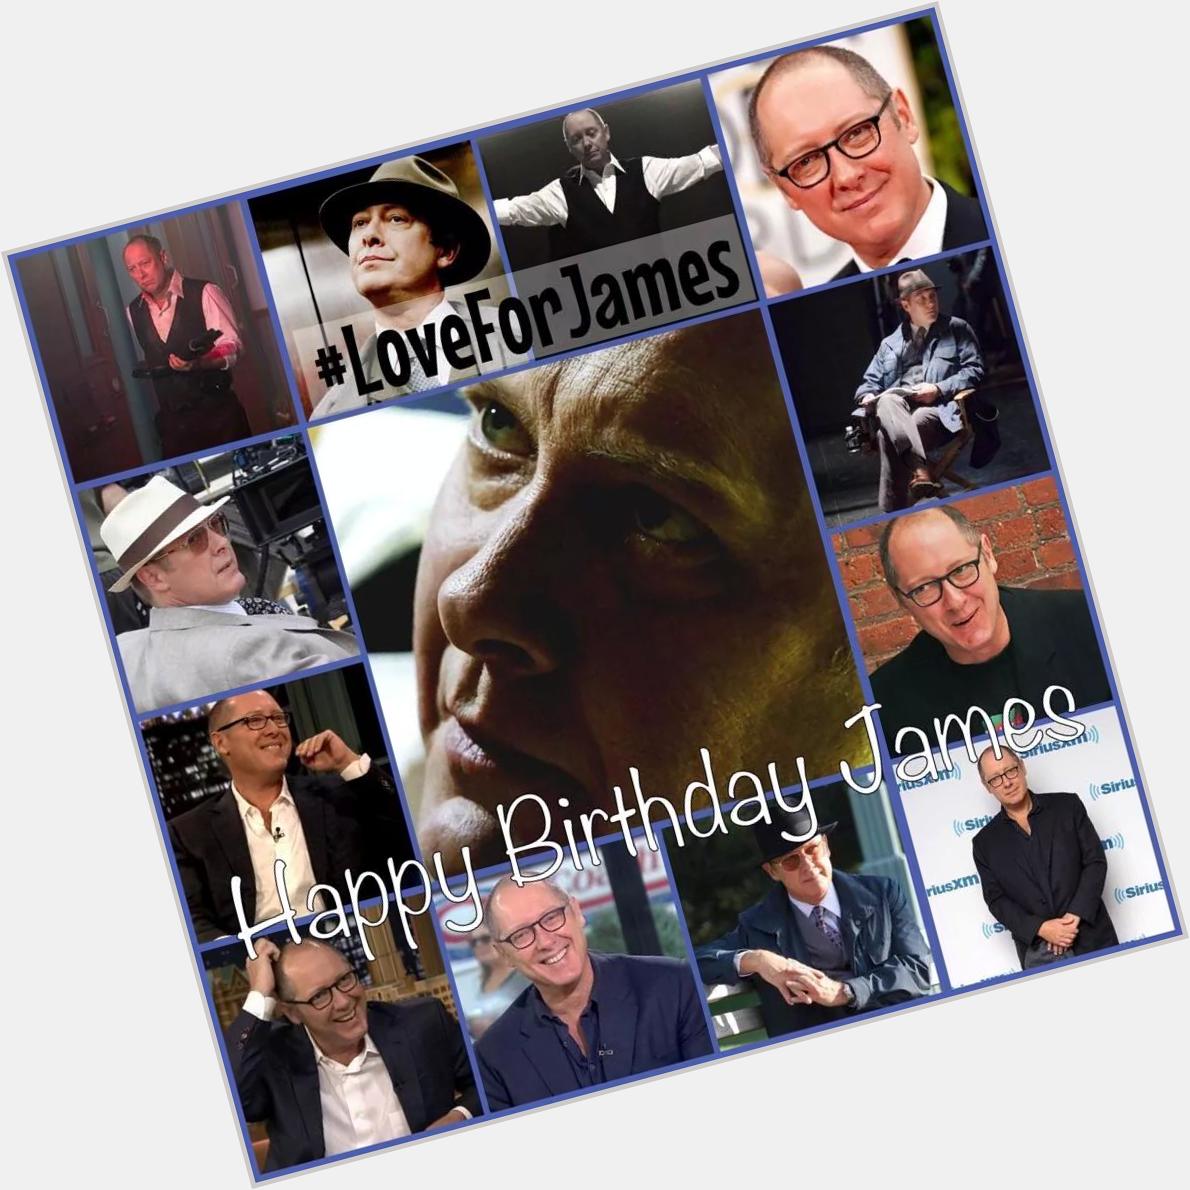  Please give James Spader a big Happy Birthday from his fans!!! 